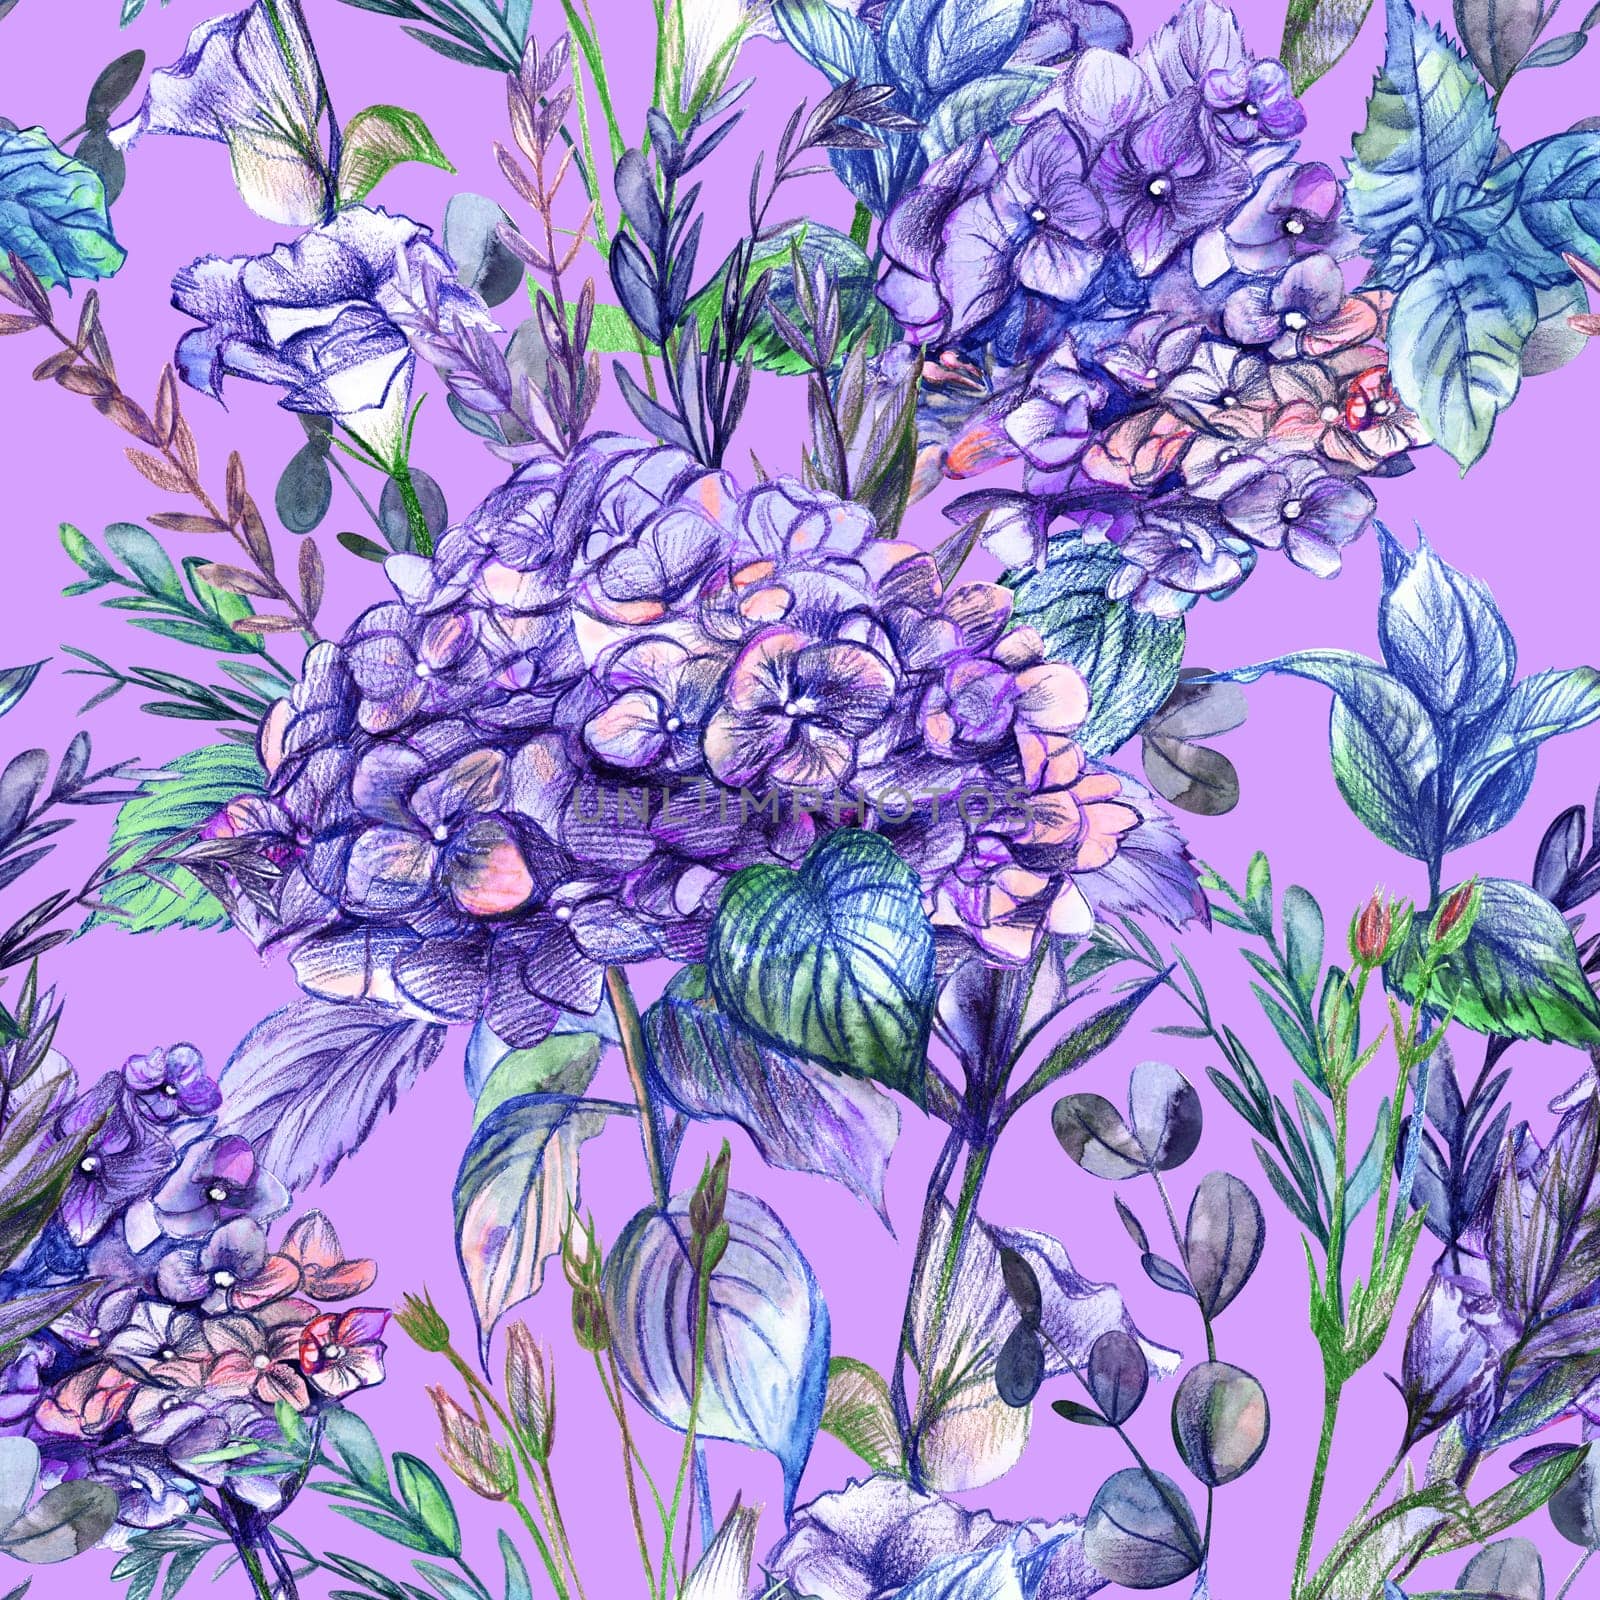 Purple seamless pattern with hydrangea flowers and herbs drawn in watercolor and pencil by MarinaVoyush